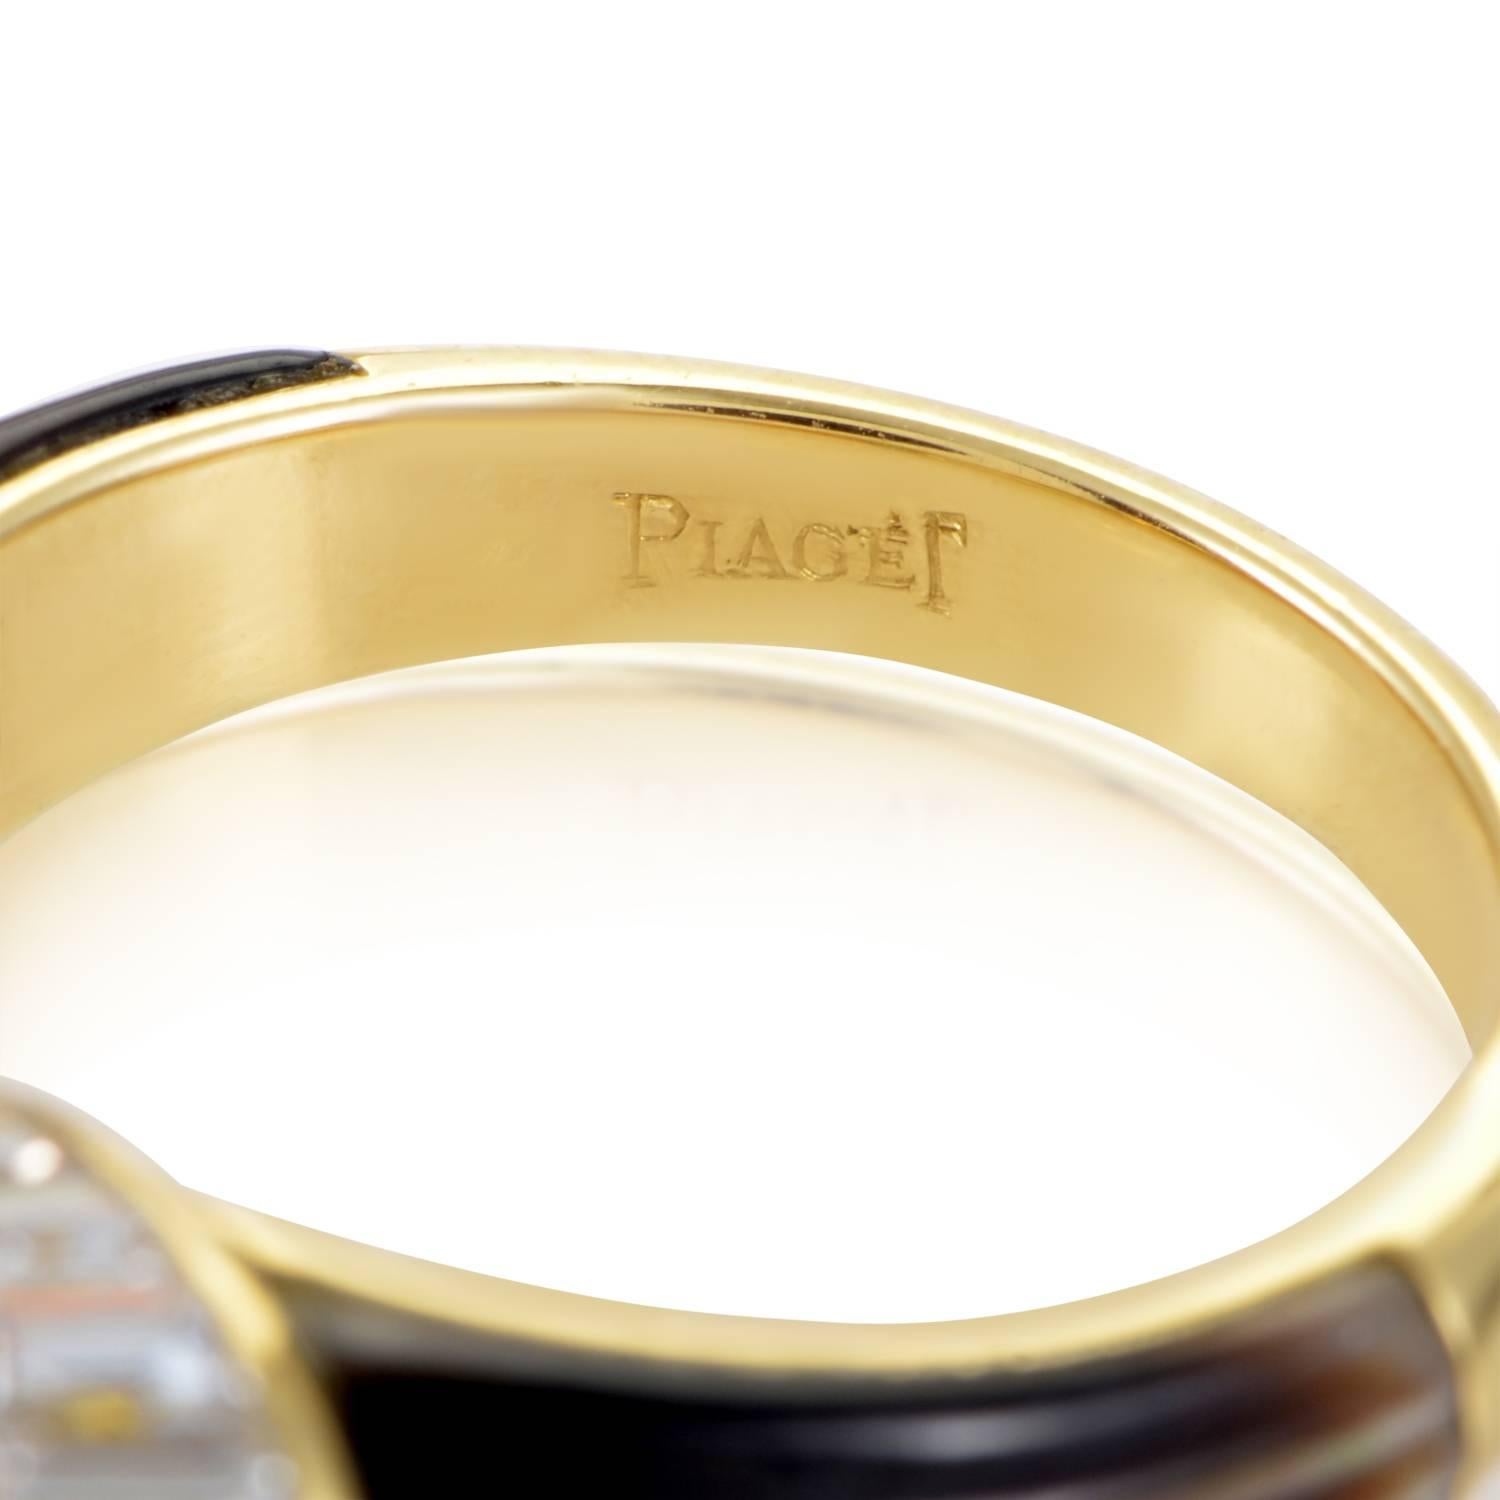 Piaget Mother of Pearl Yellow Sapphire Diamond Gold Ring 1